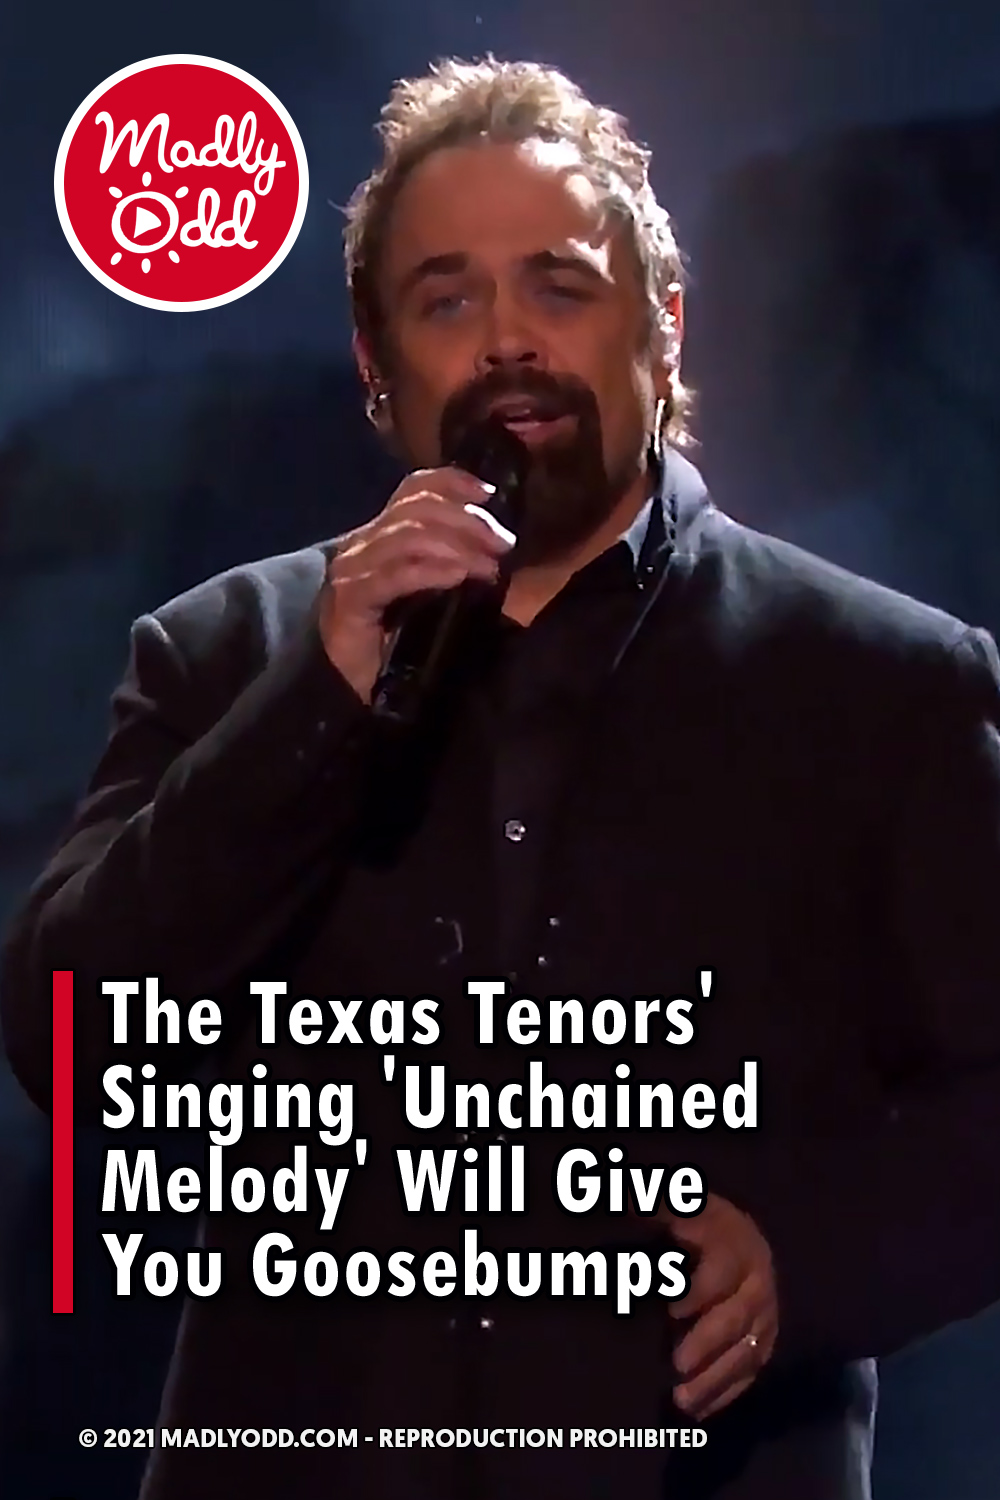 \'The Texas Tenors\' Singing \'Unchained Melody\' Will Give You Goosebumps